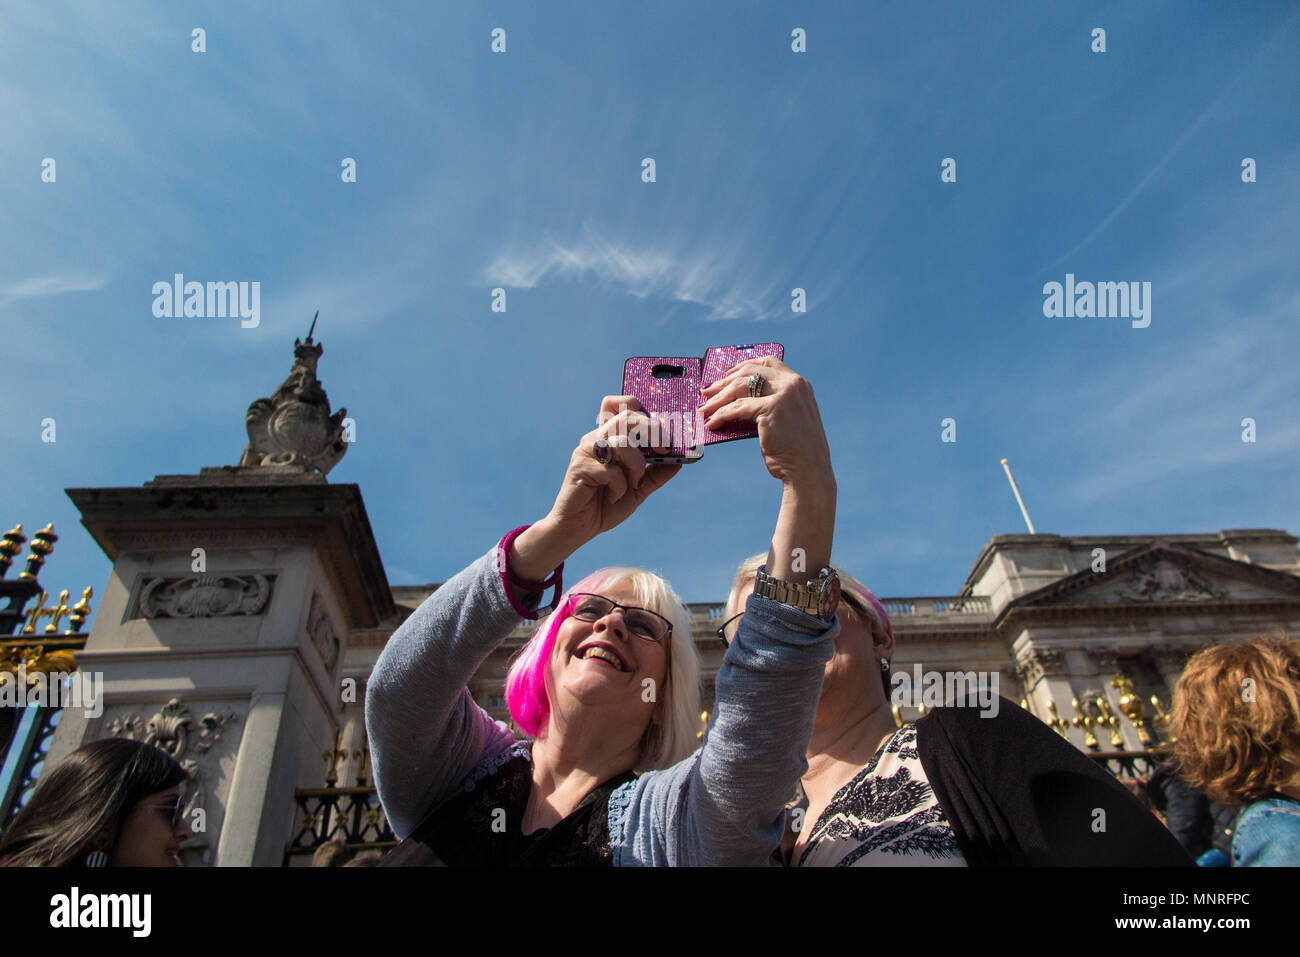 Two ladies with pink hair take a selfie and pictures of an event at Buckingham Palace Stock Photo